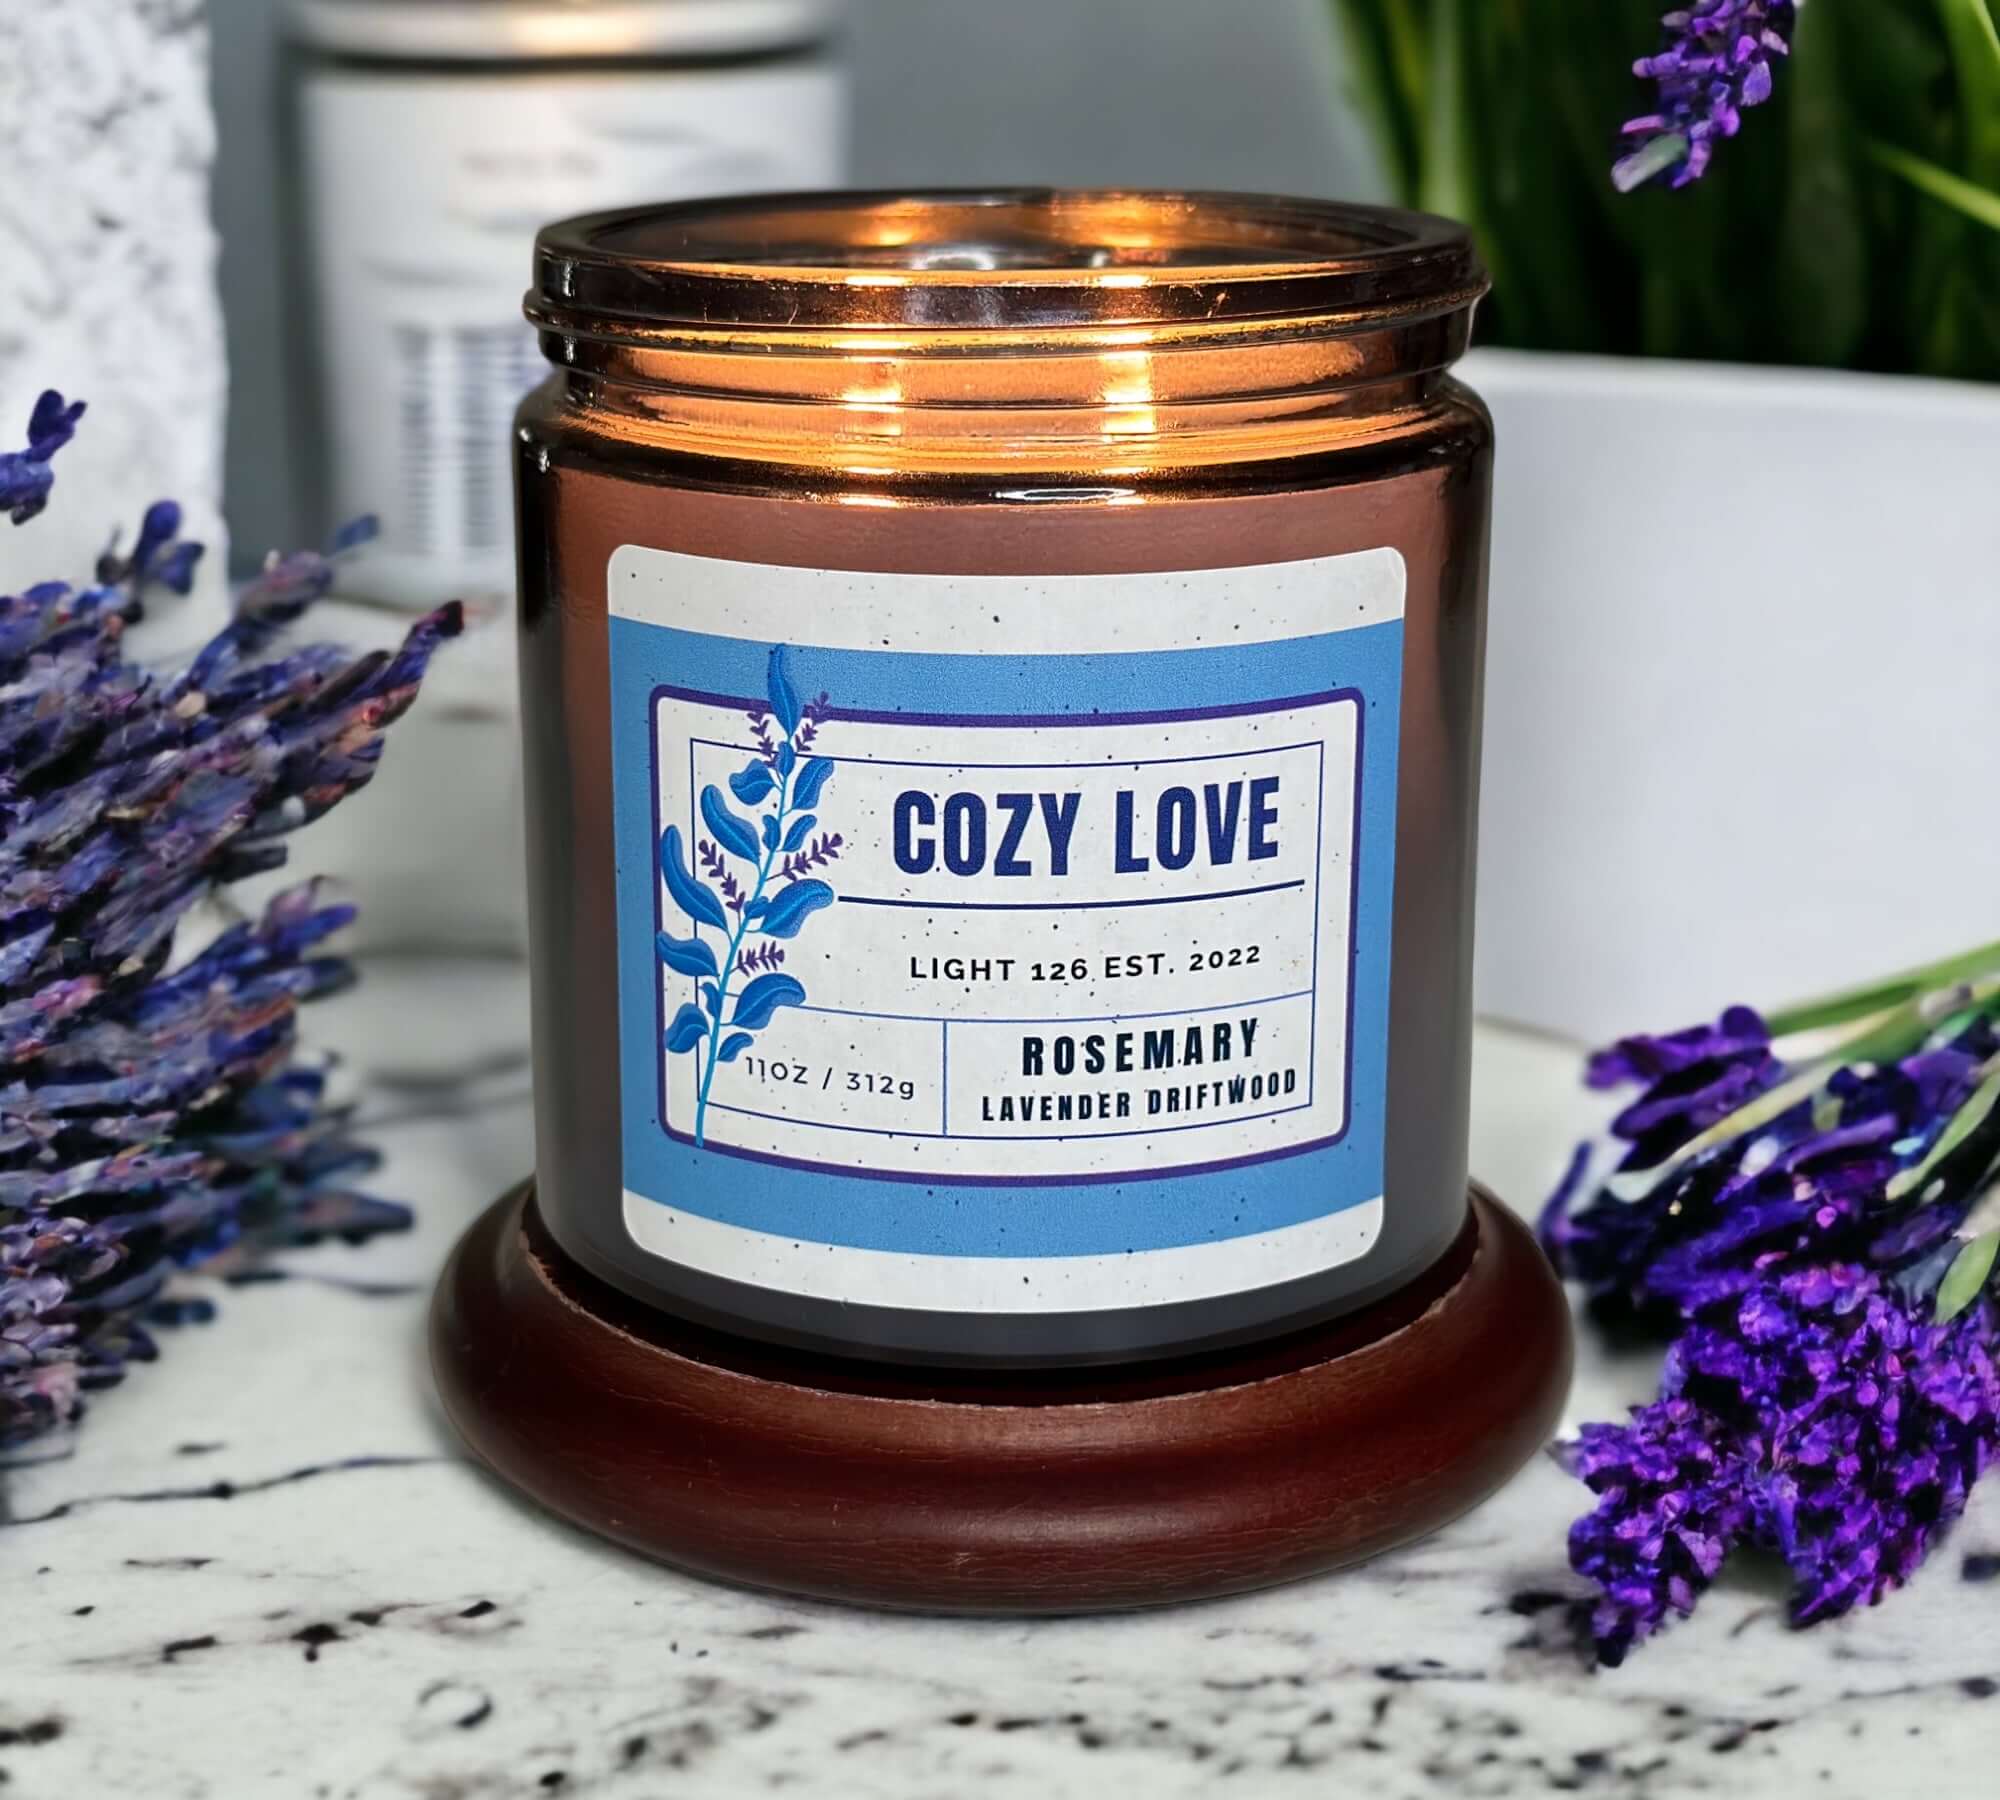 Cozy Love scented candle. Rosemary and lavender candle